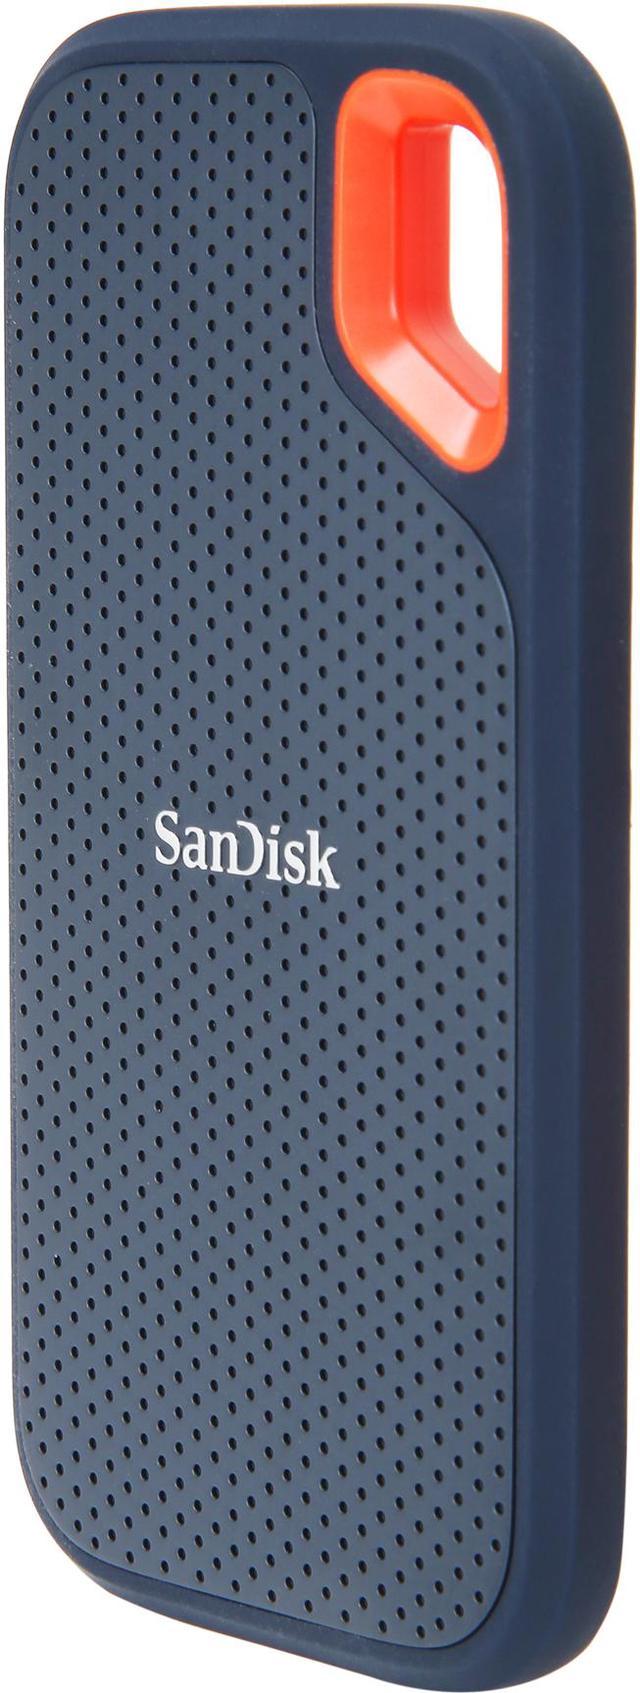 SanDisk 250GB Extreme Portable External SSD - Up to 550 MB/s - USB